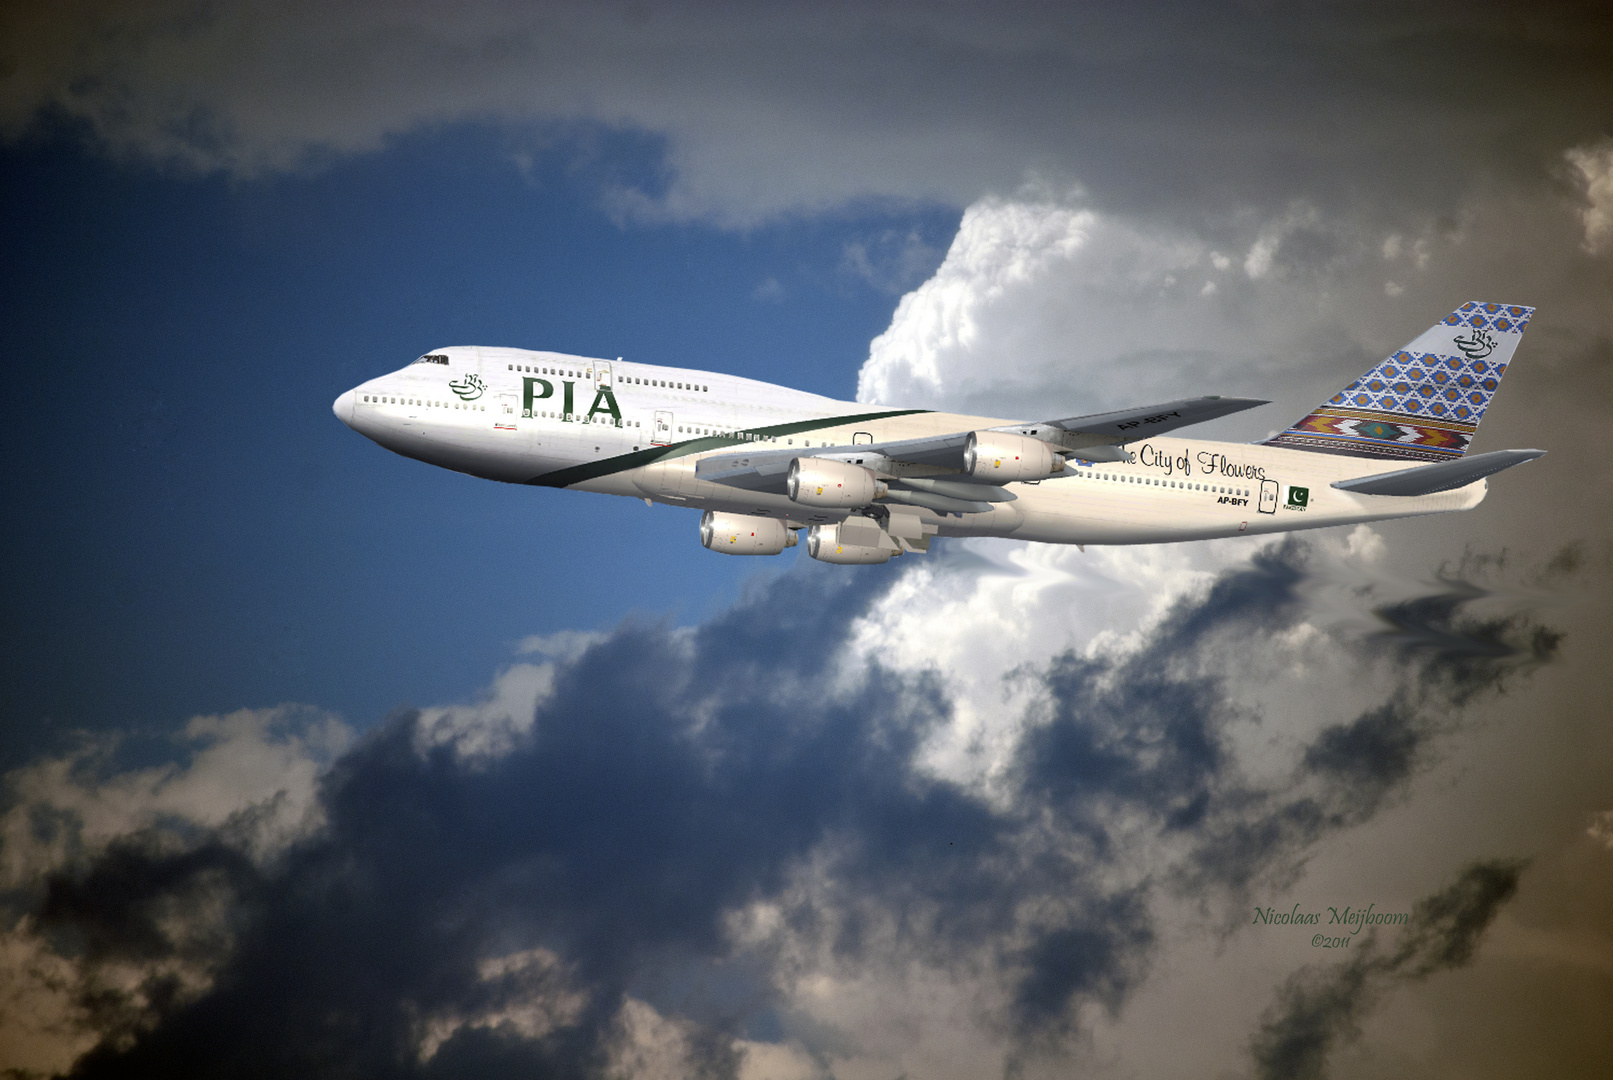 City of Flowers PIA, AP-BFY Boeing 747-367